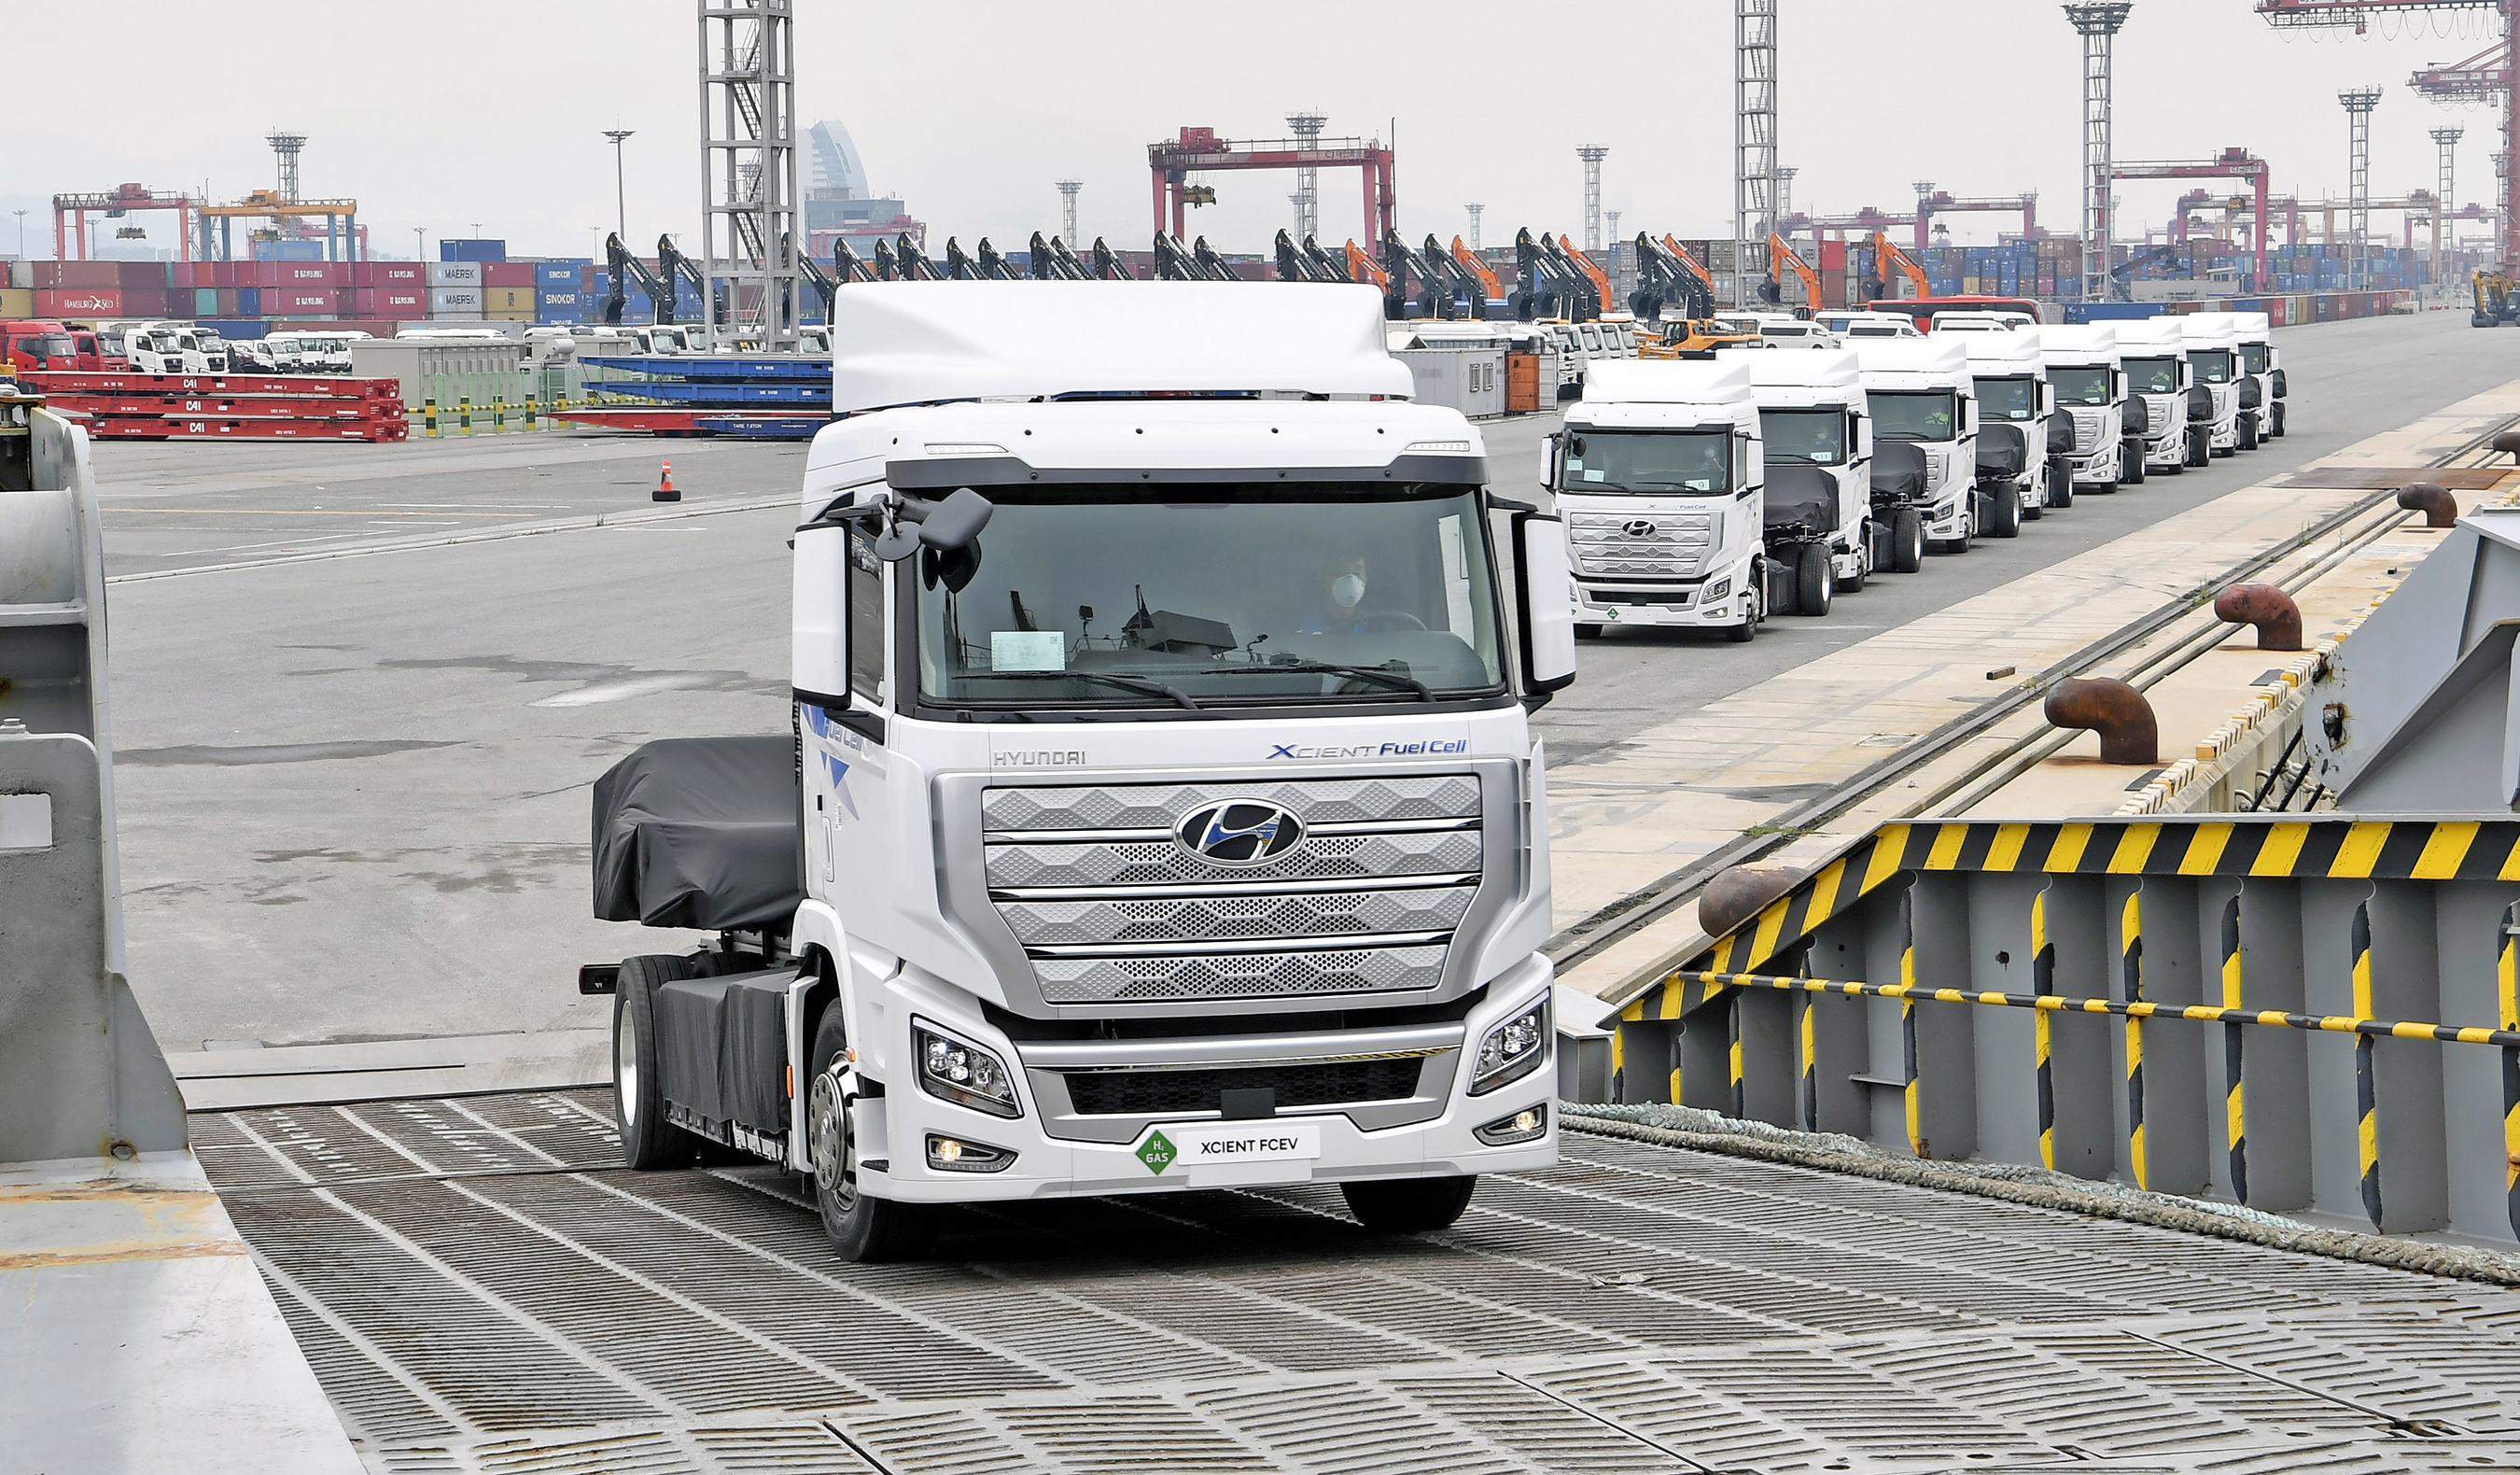 World's First Fuel Cell Heavy-Duty Truck, Hyundai XCIENT Fuel Cell, Heads to Europe for Commercial Use